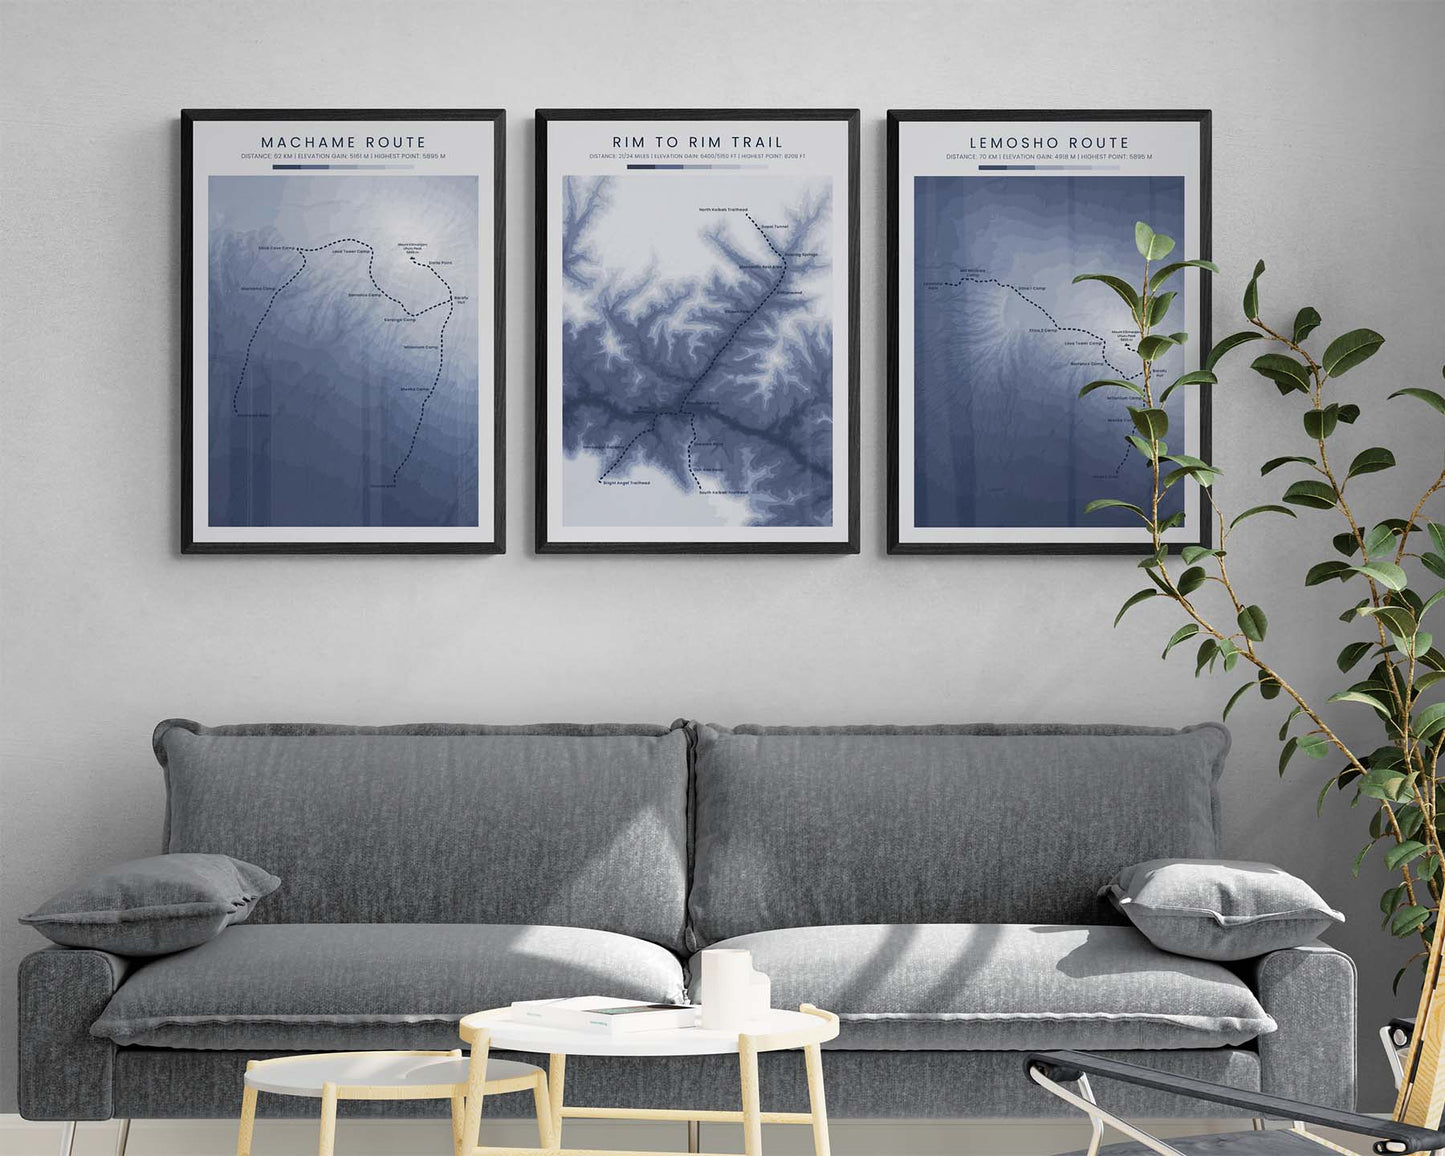 Mount Kilimanjaro Trek (Africa) Path Wall Decor with Shaded Relief Map in Modern Interior Wall Art